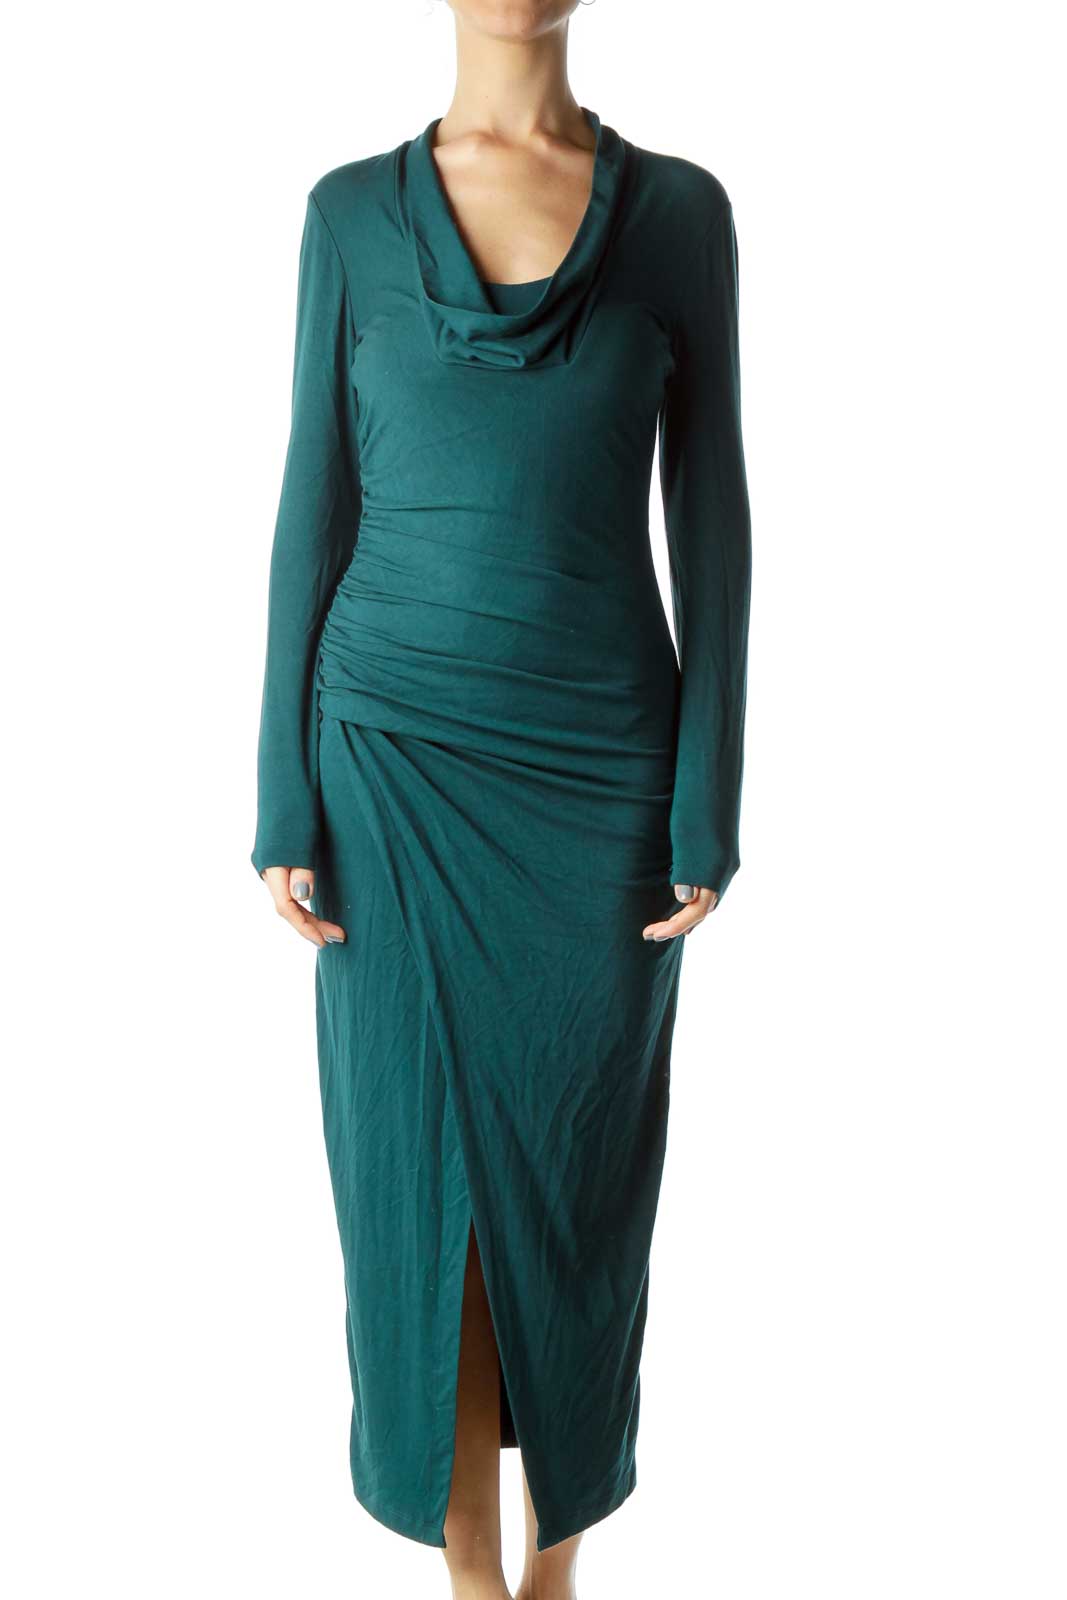 Dark Green Cowl Neck Fitted Jersey Dress Front